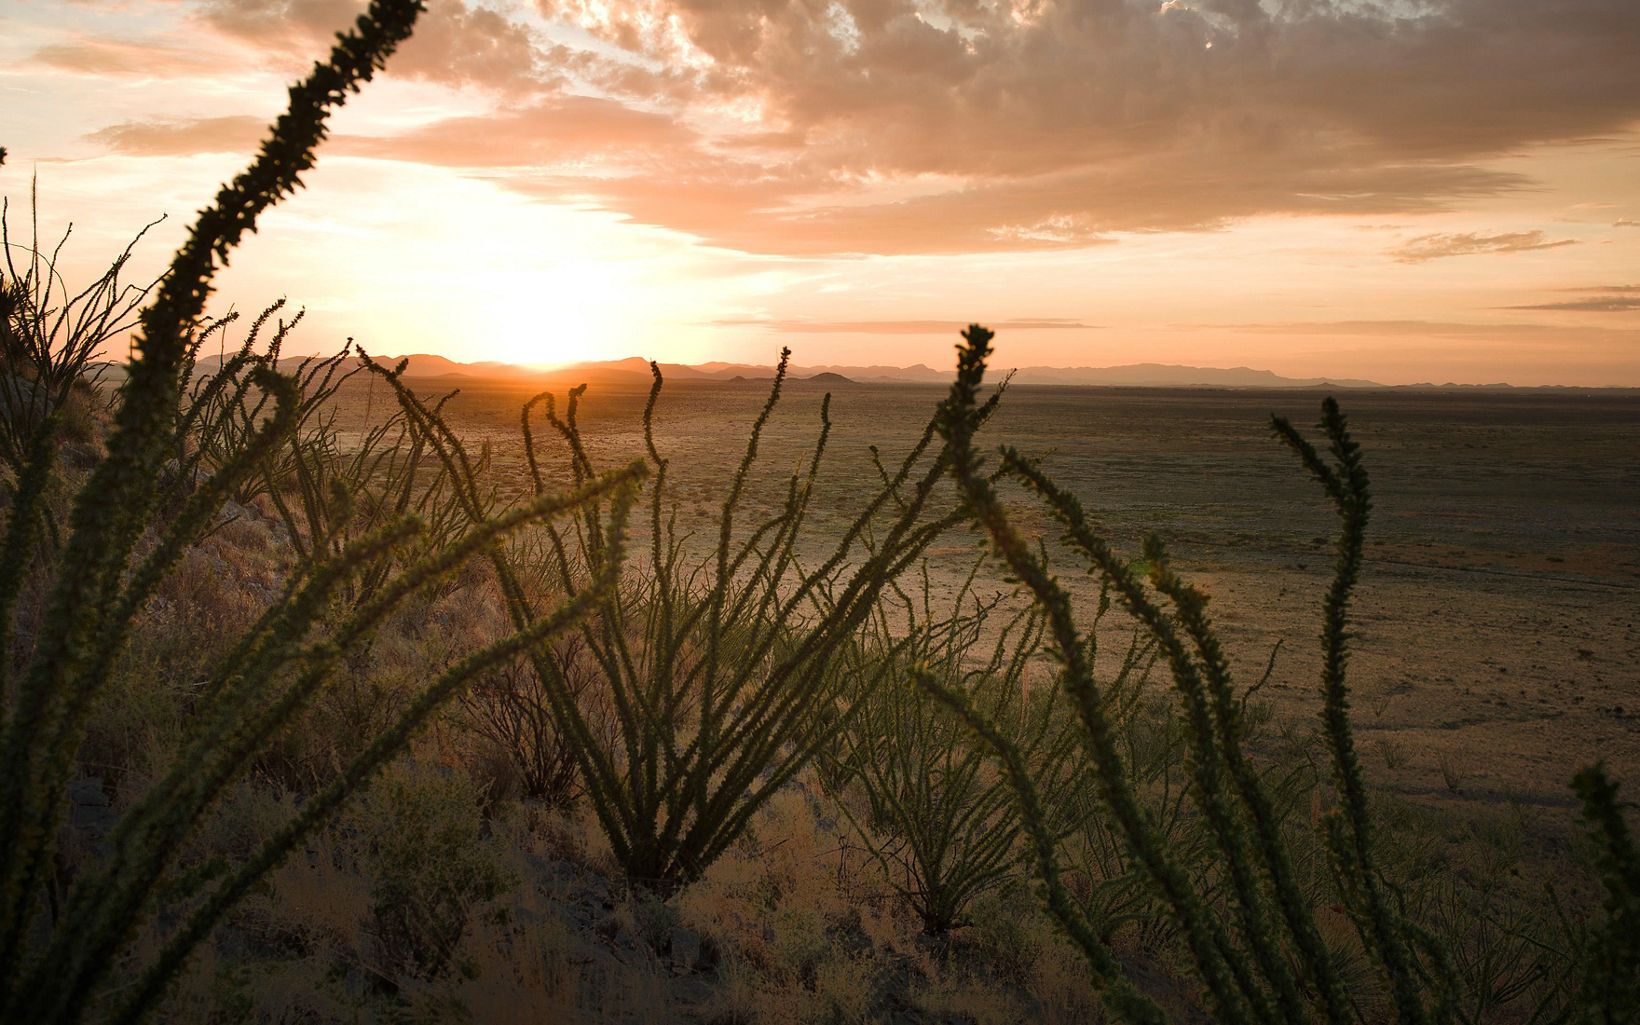 A 46,000-acre ranch in northern Mexico’s Janos Valley.